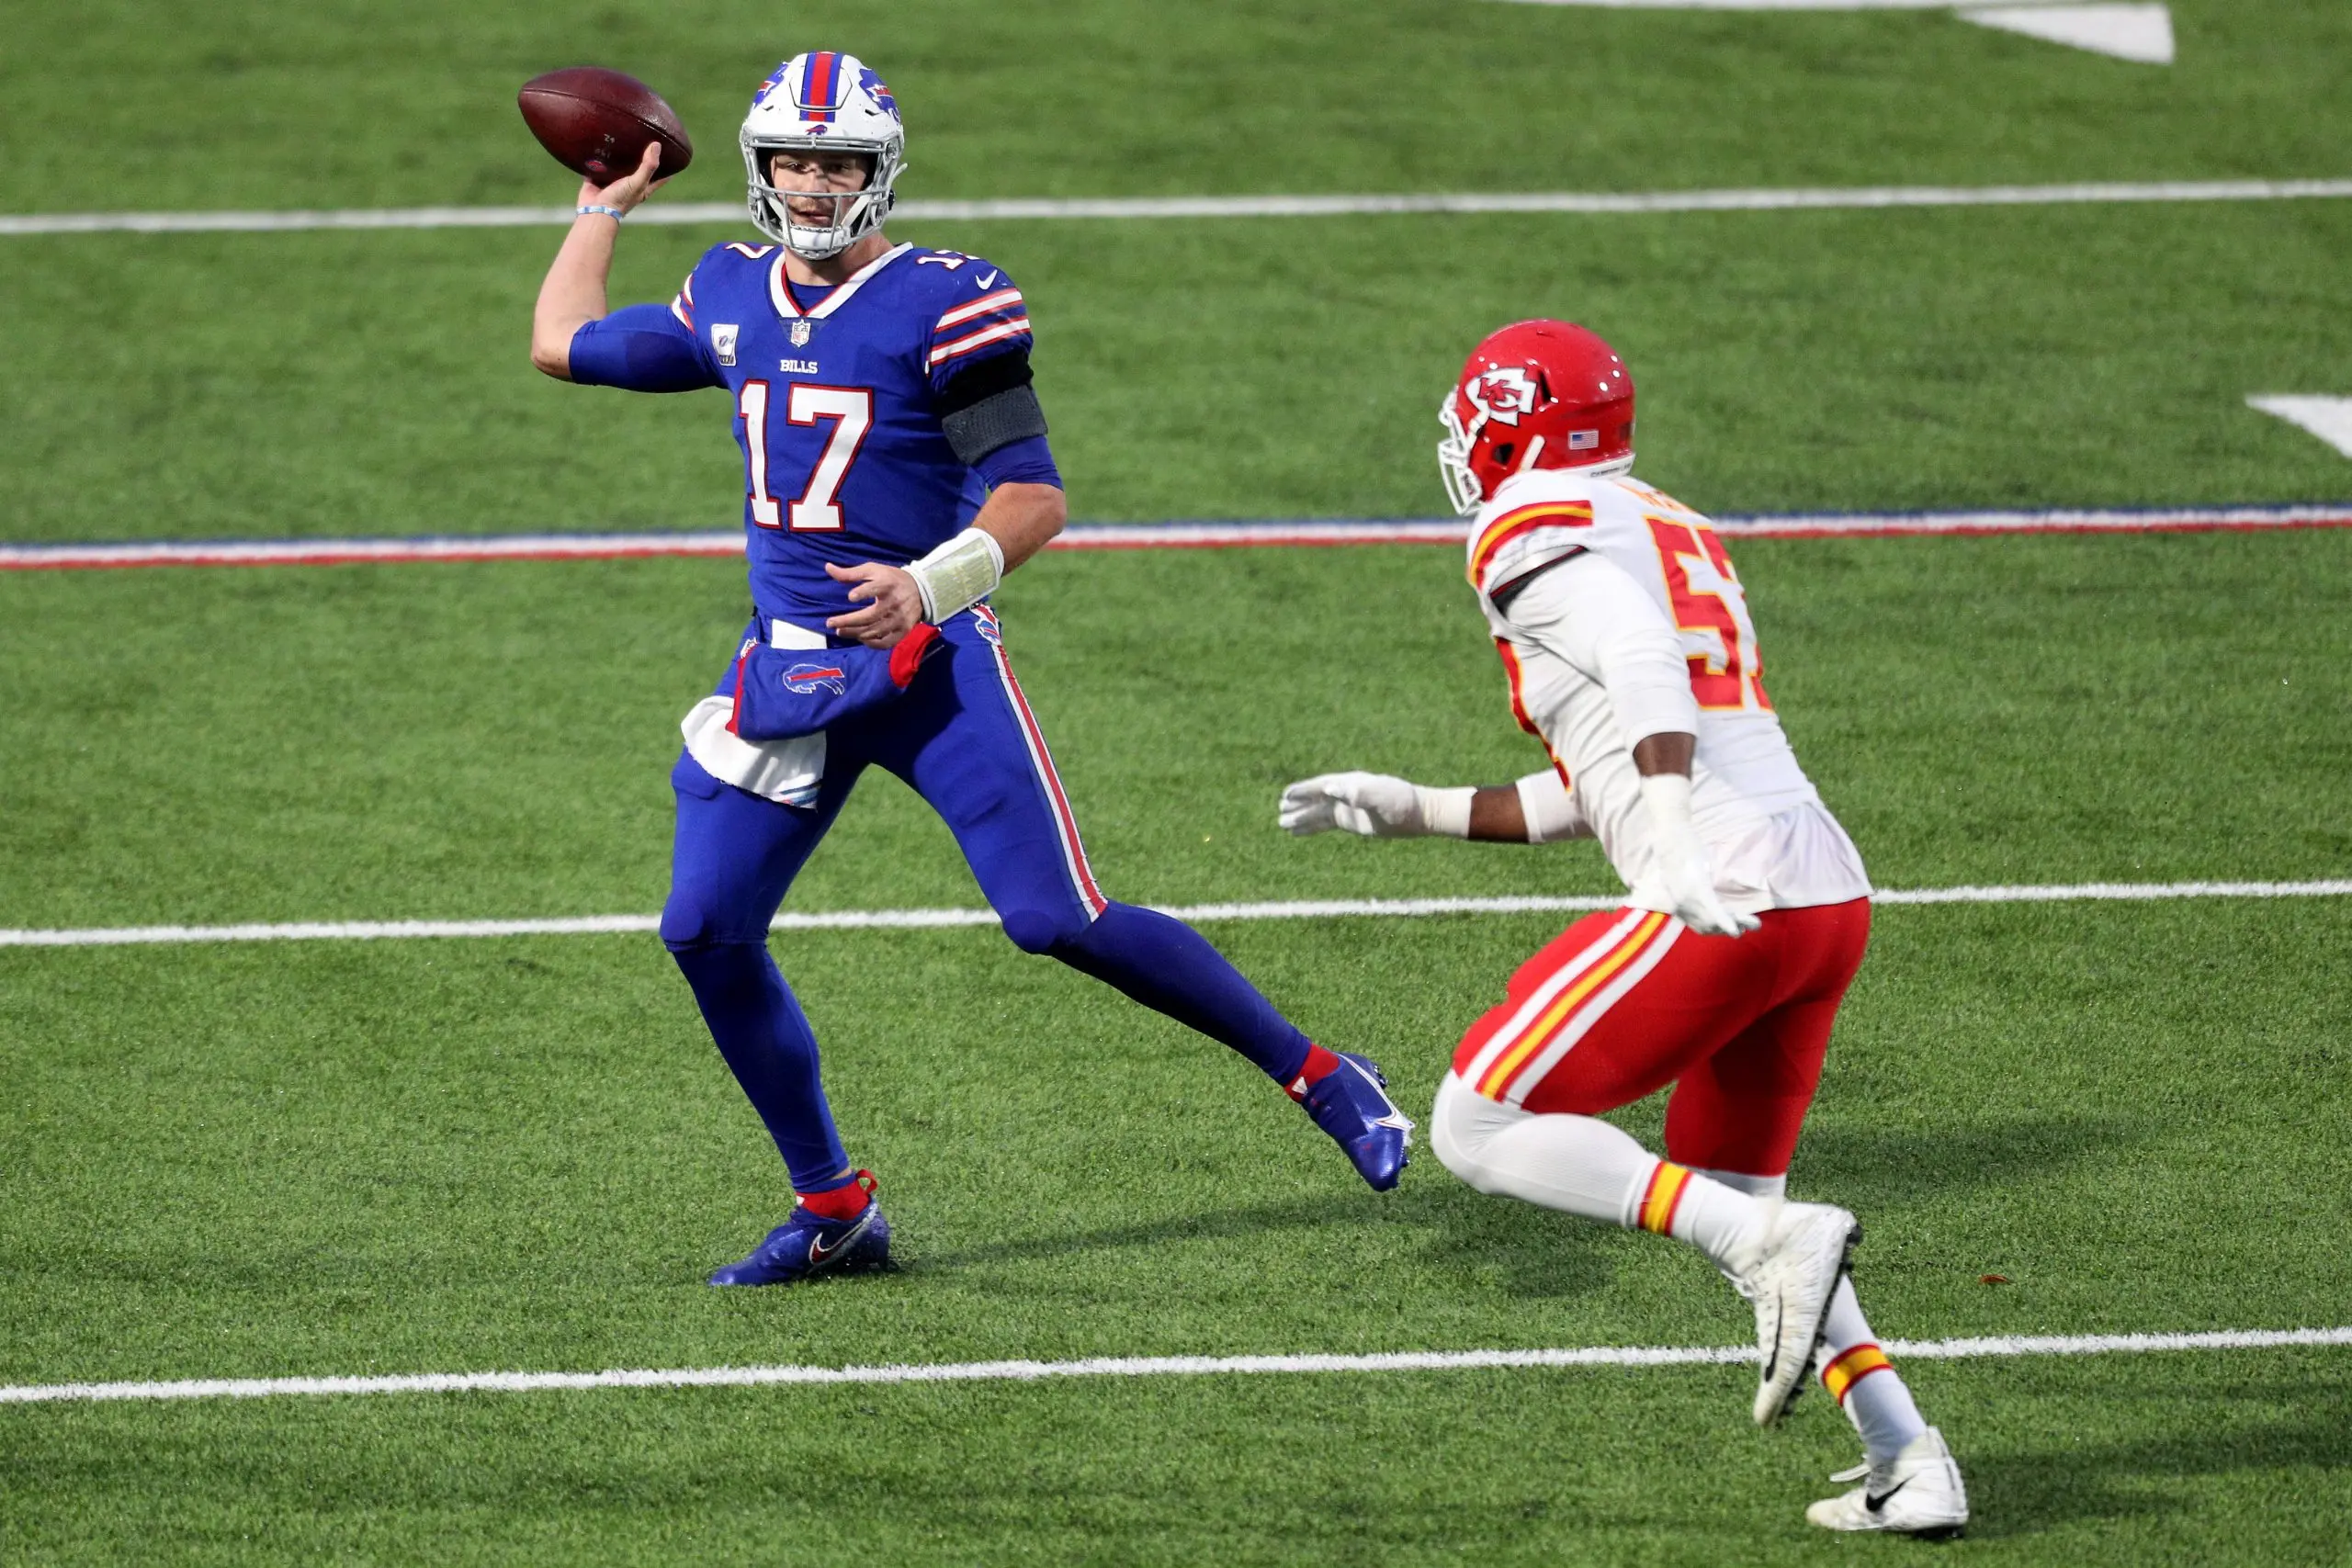 ORCHARD PARK, NEW YORK - OCTOBER 19: Josh Allen #17 of the Buffalo Bills looks to pass as Alex Okafor #57 of the Kansas City Chiefs defends during the second quarter at Bills Stadium on October 19, 2020 in Orchard Park, New York